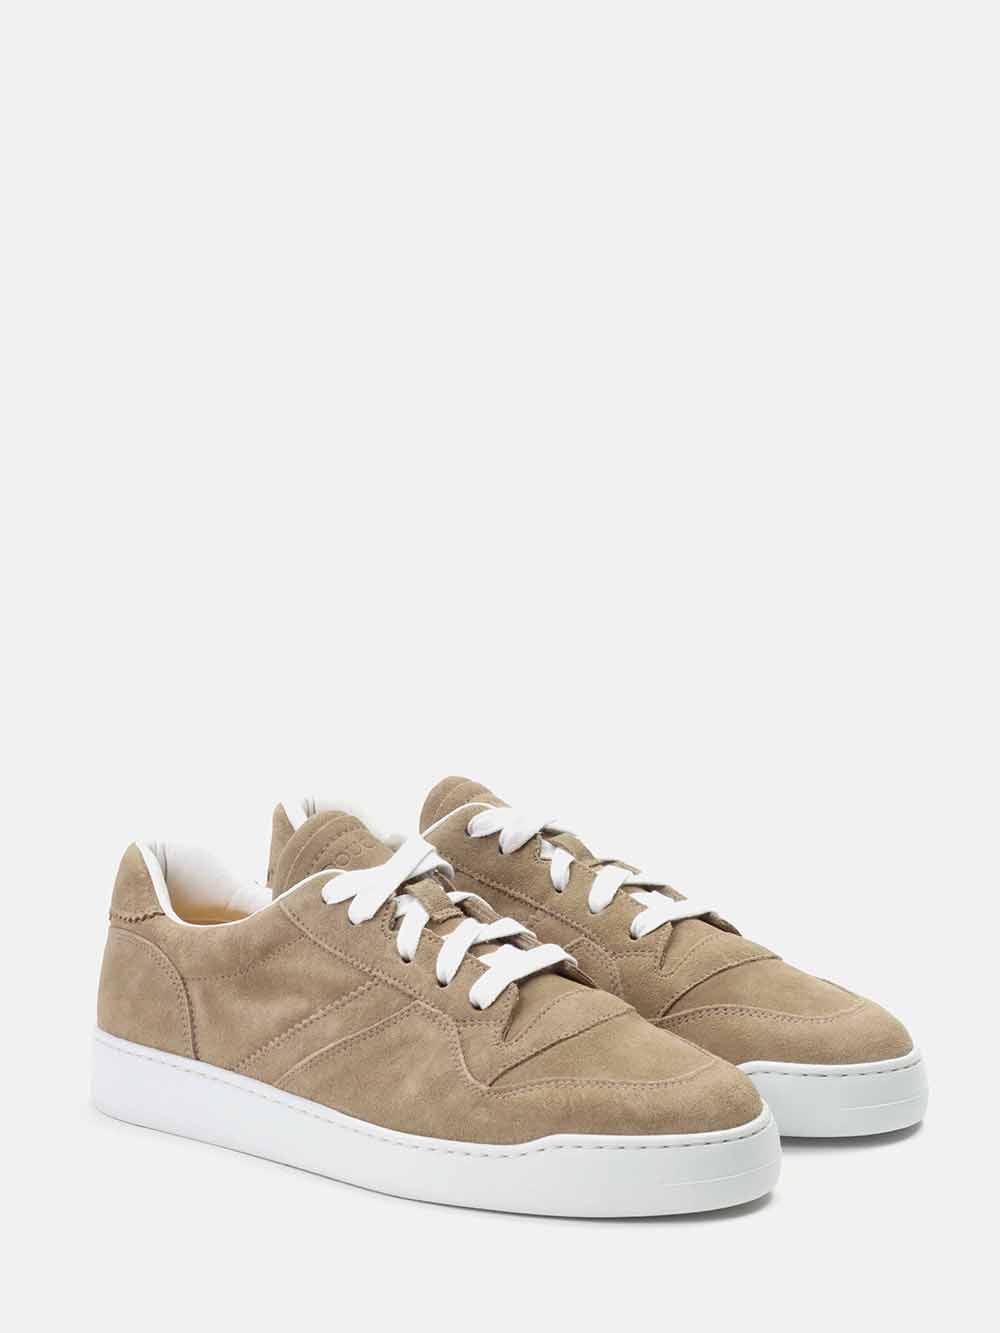 Sand sneakers